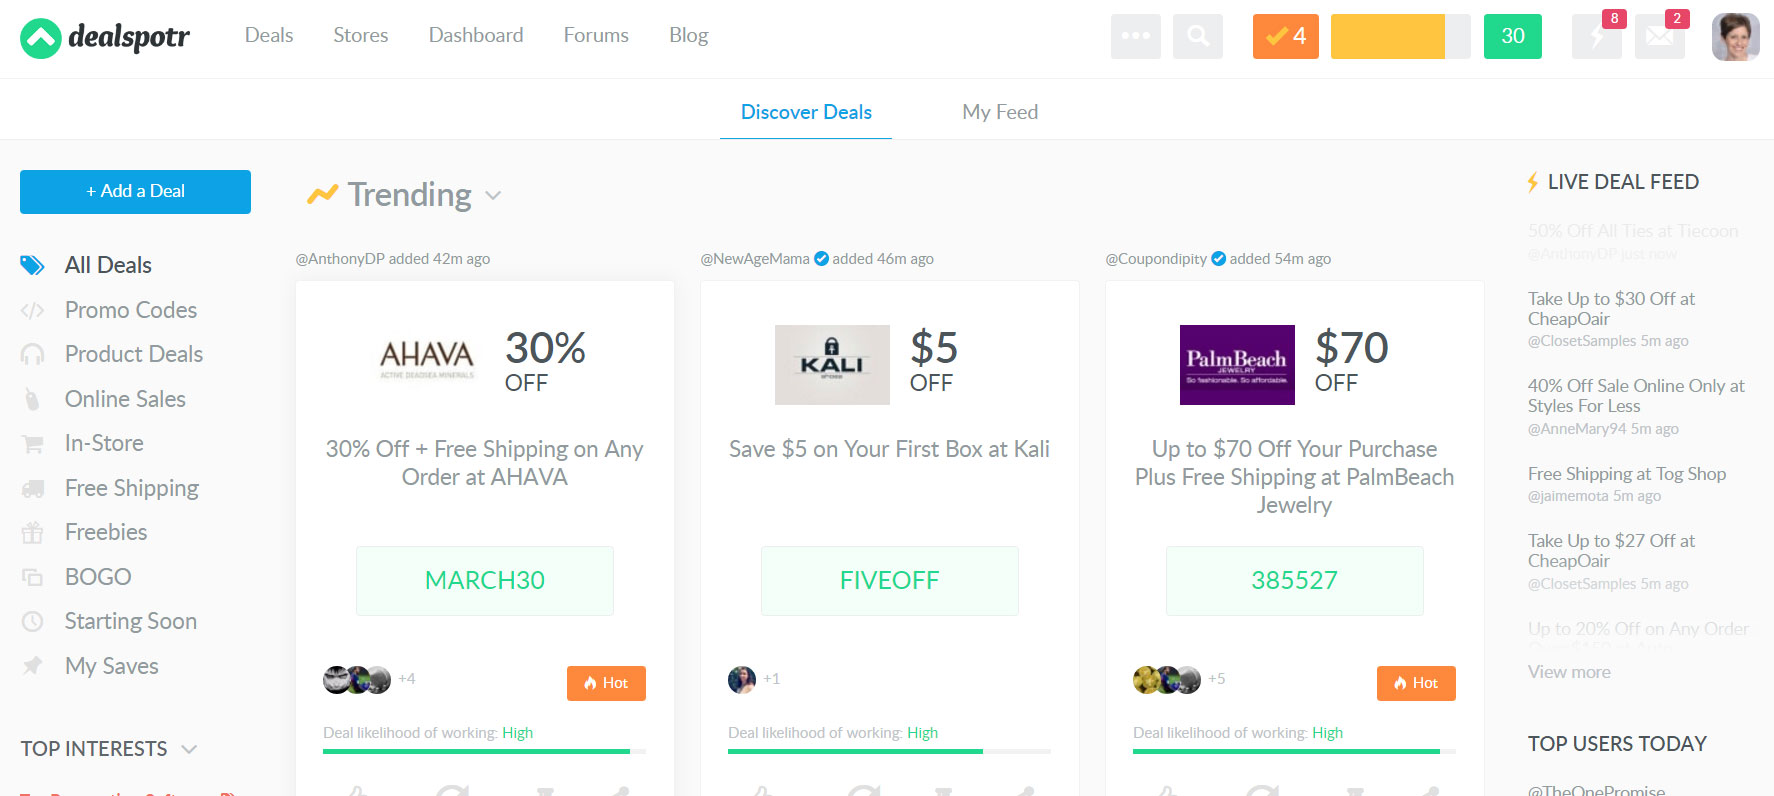 Dealspotr coupon crowdsourcing initial login to save money or make money